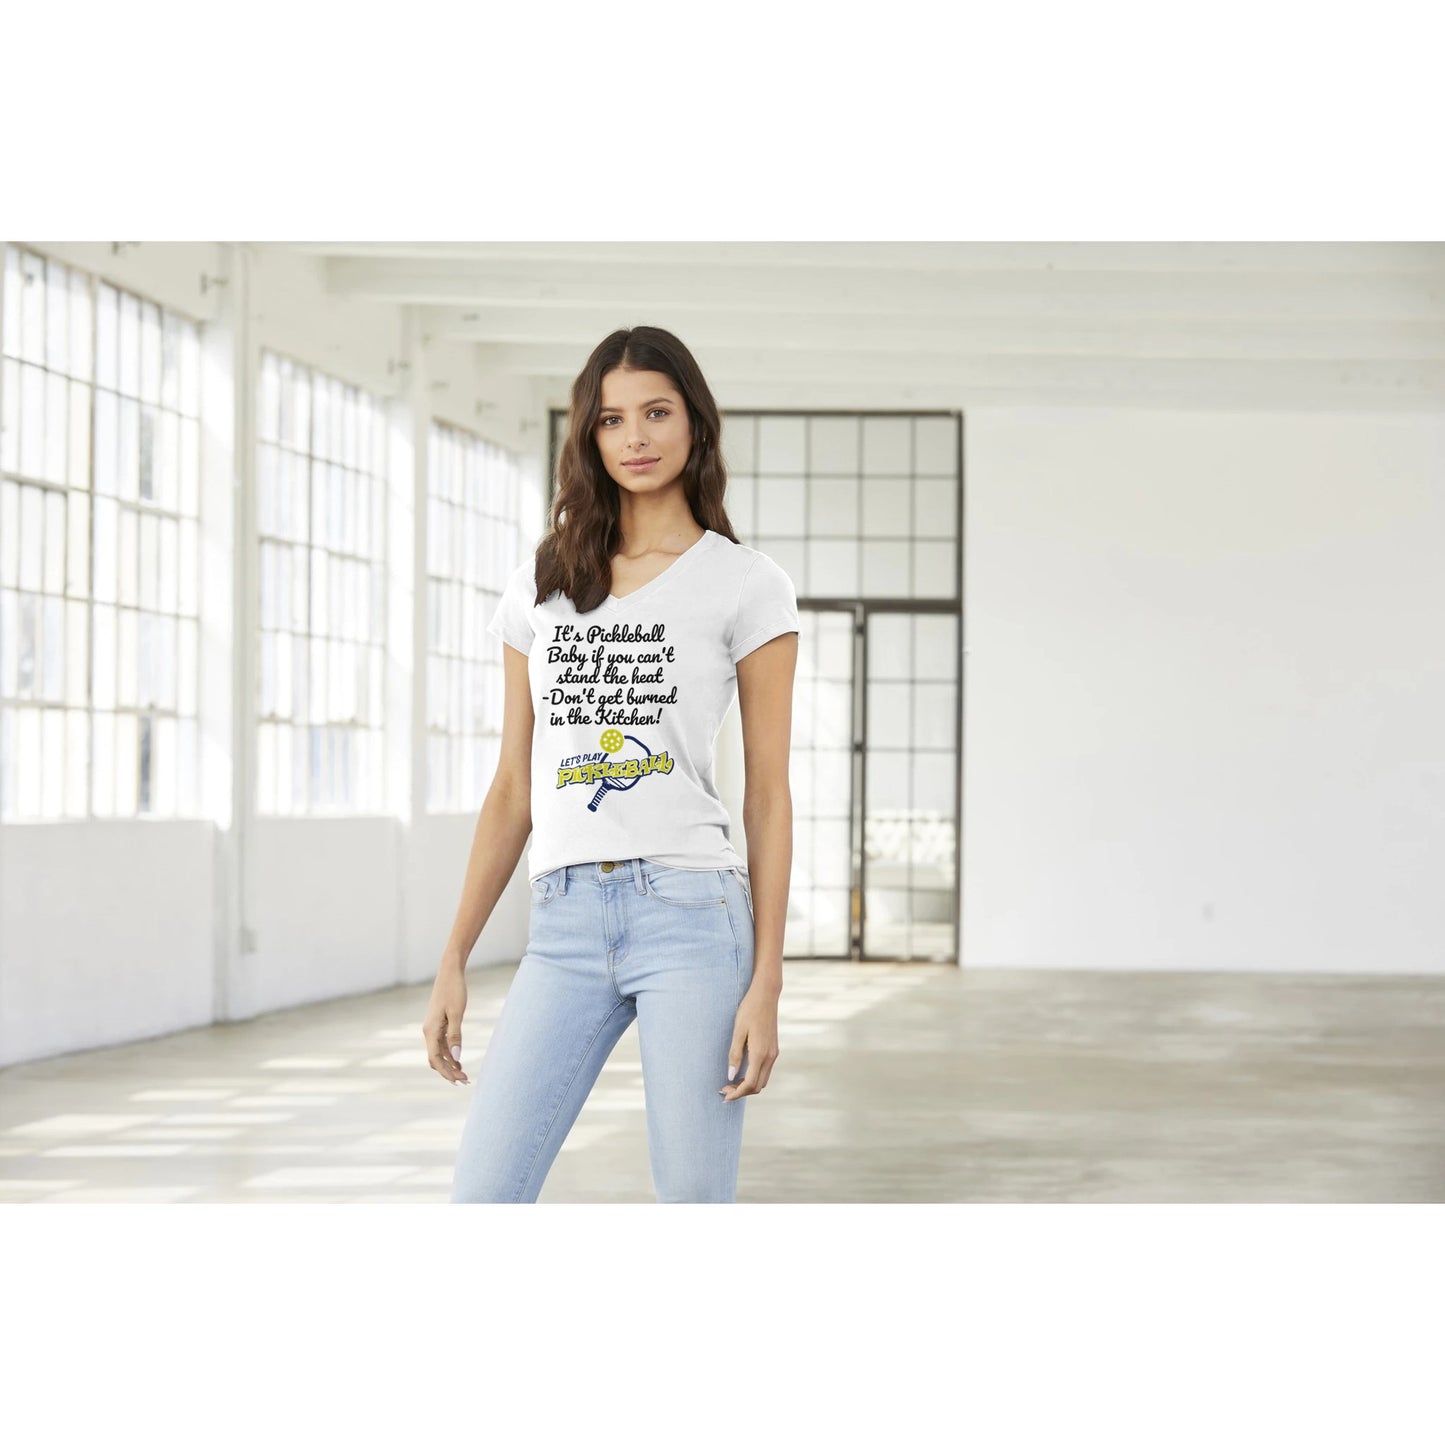 A premium women’s V-neck t-shirt from combed and ring-spun cotton original logo It's PIckleball Baby if you can't stand the heat - Don't get burned in the Kitchen and Let's Play PickleBall on front worn by a dark-haired female model standing.